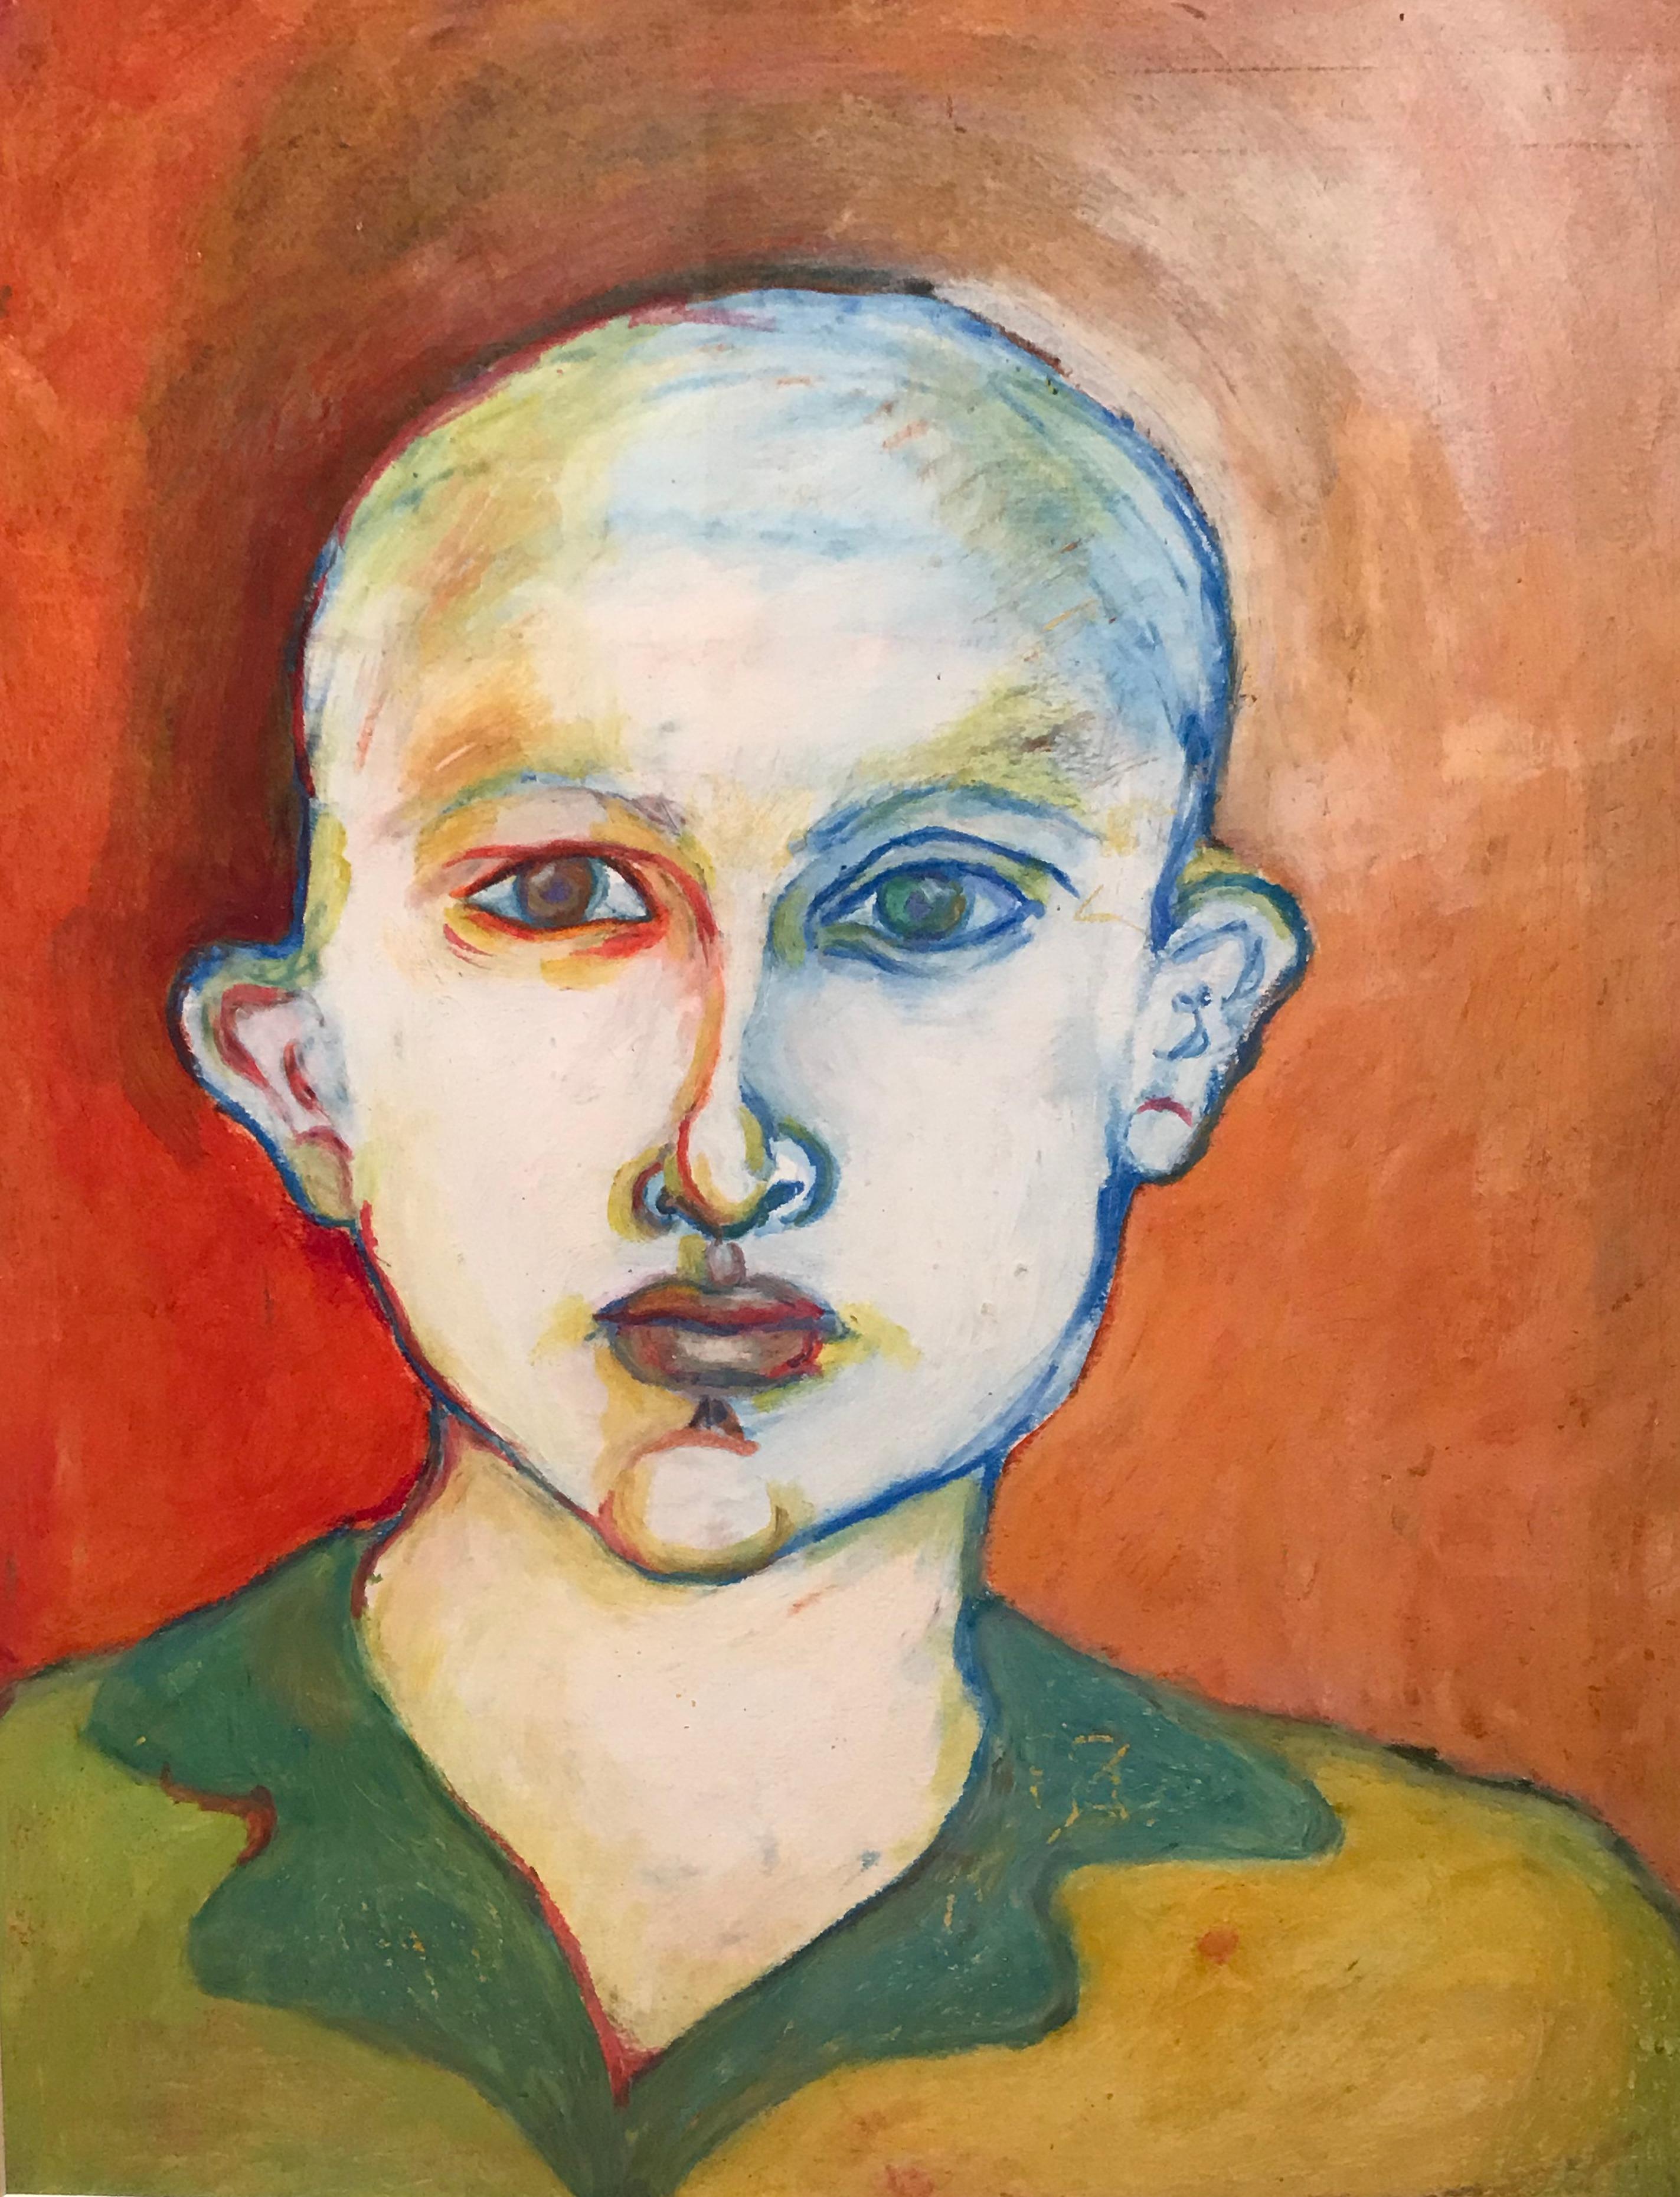 Portrait of an androgynous figure. 
Through a dramatic and expressive color palette, Lefkowitz showcases so much emotion in her portraits. Her artworks are known to convey the mood of the person she painted.
After her career as a professional